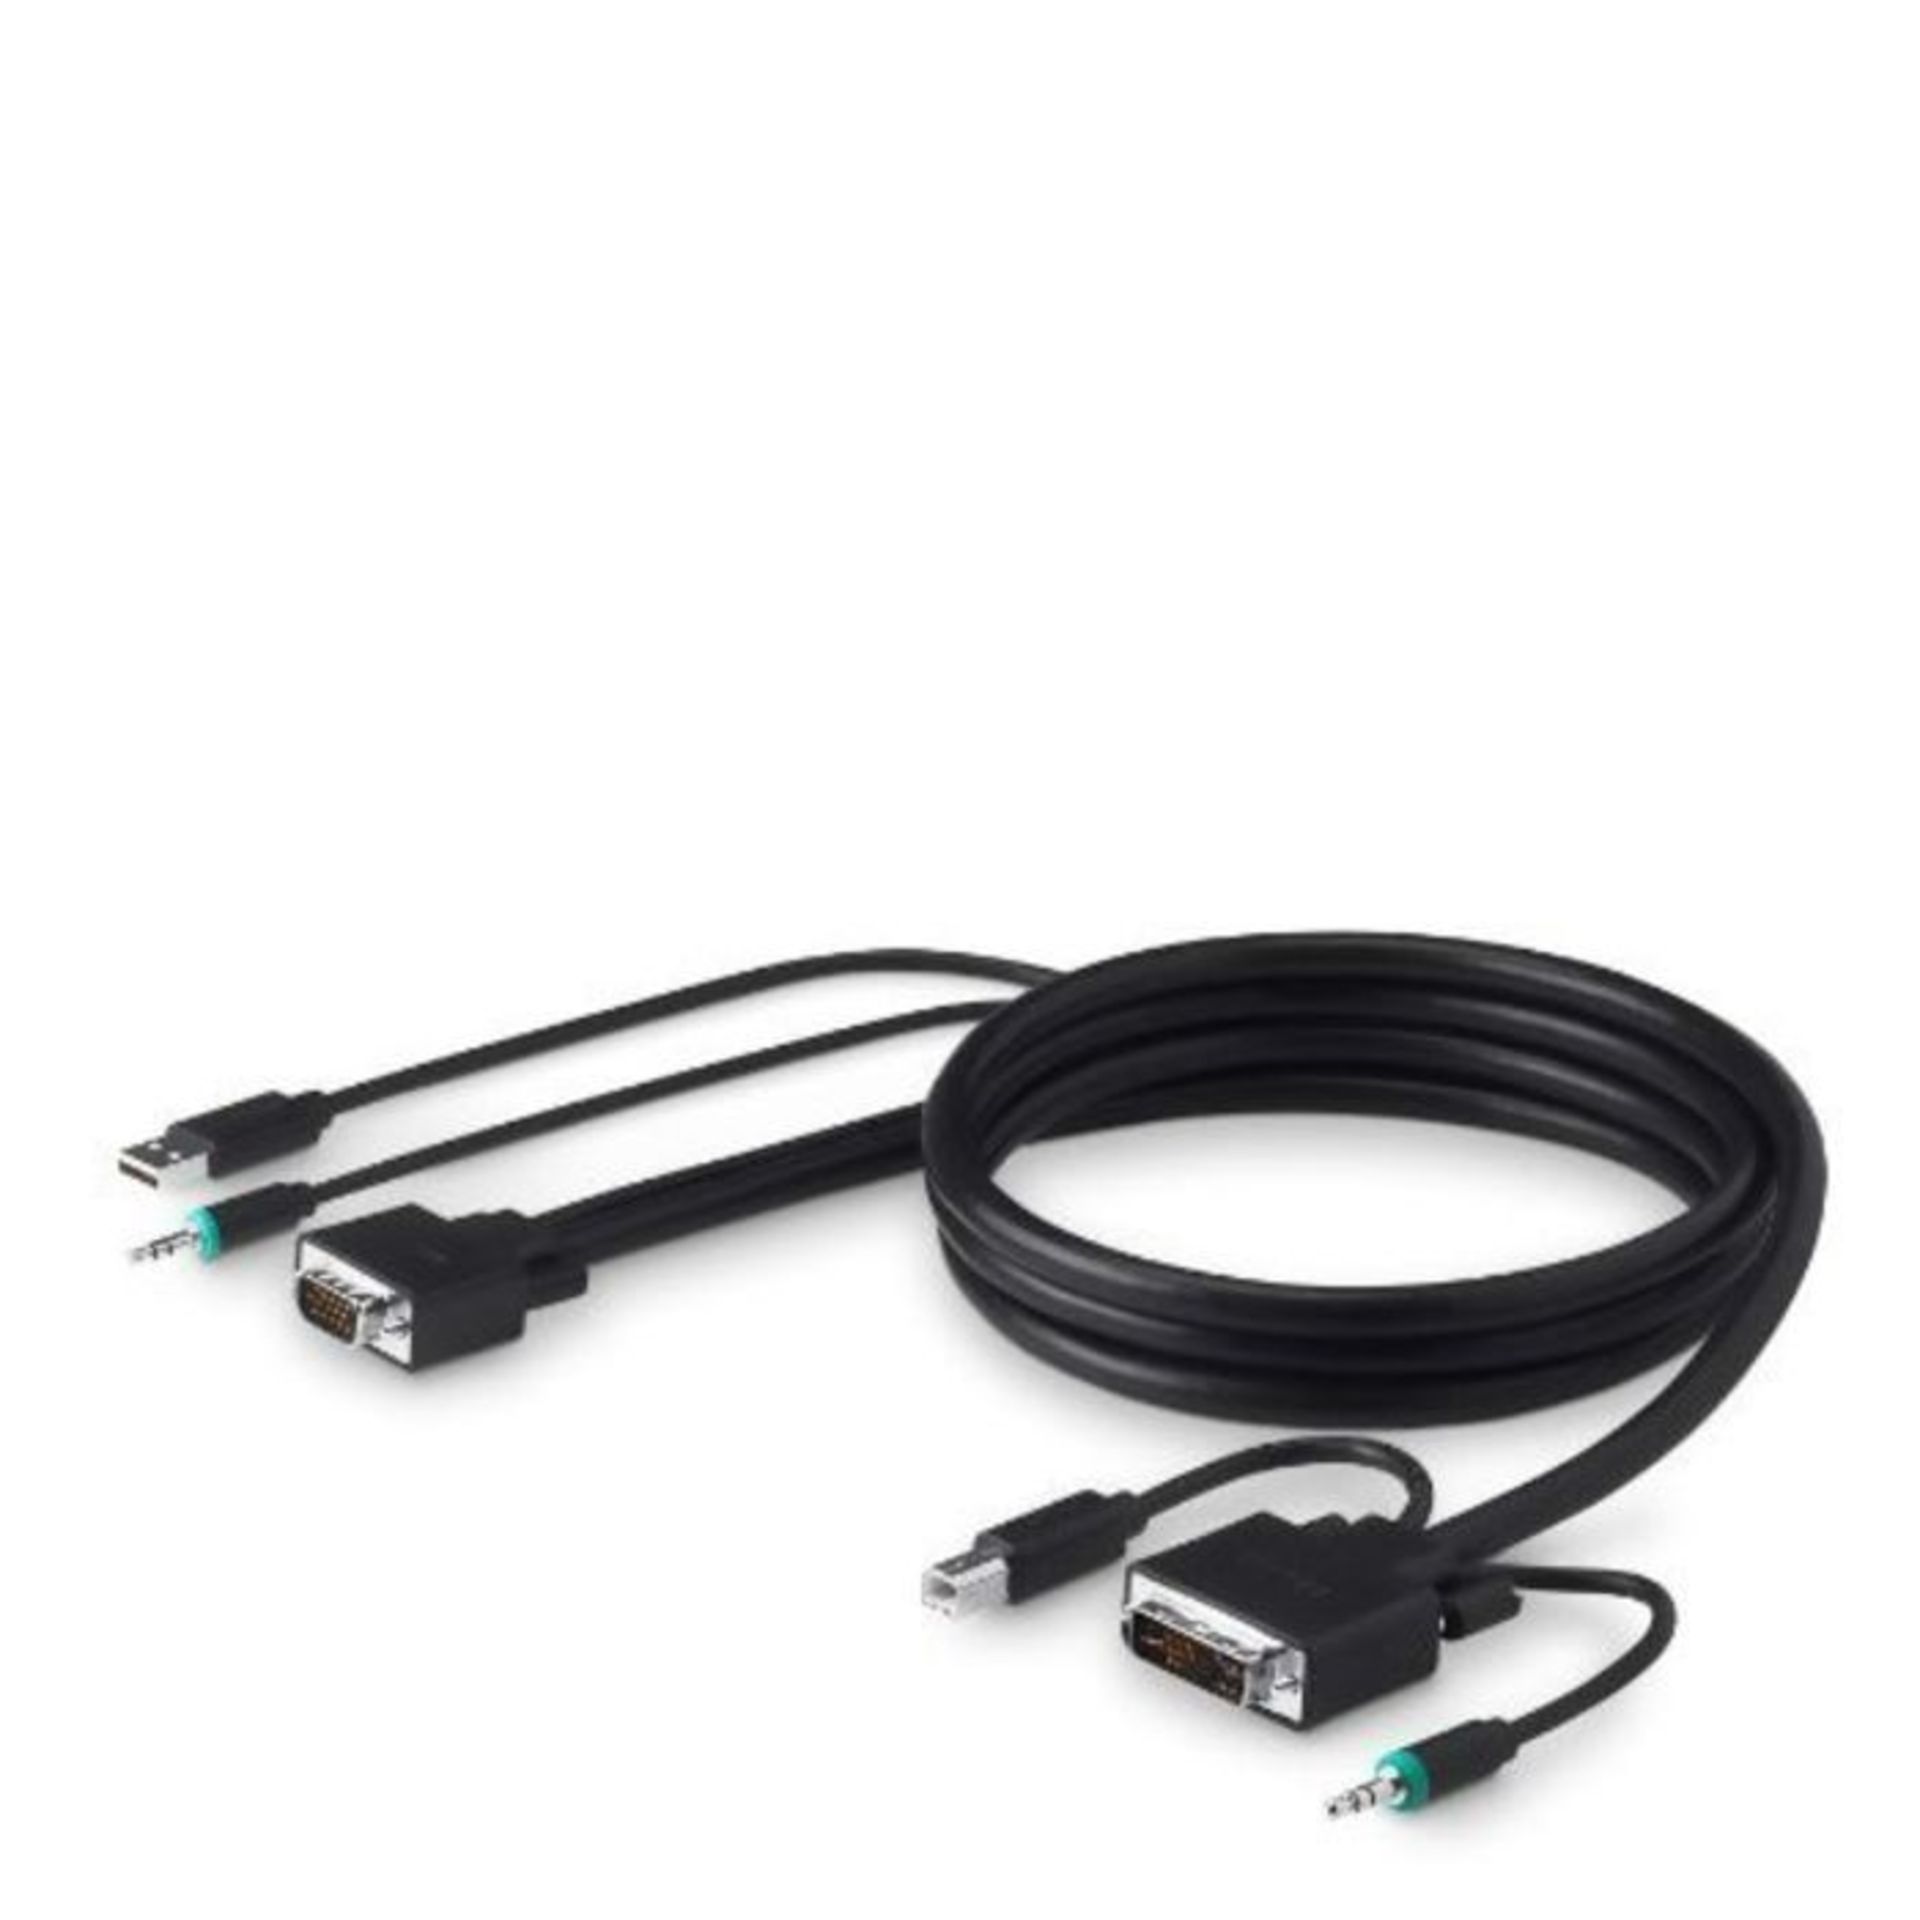 Belkin 10ft VGA to DVI-A with USB